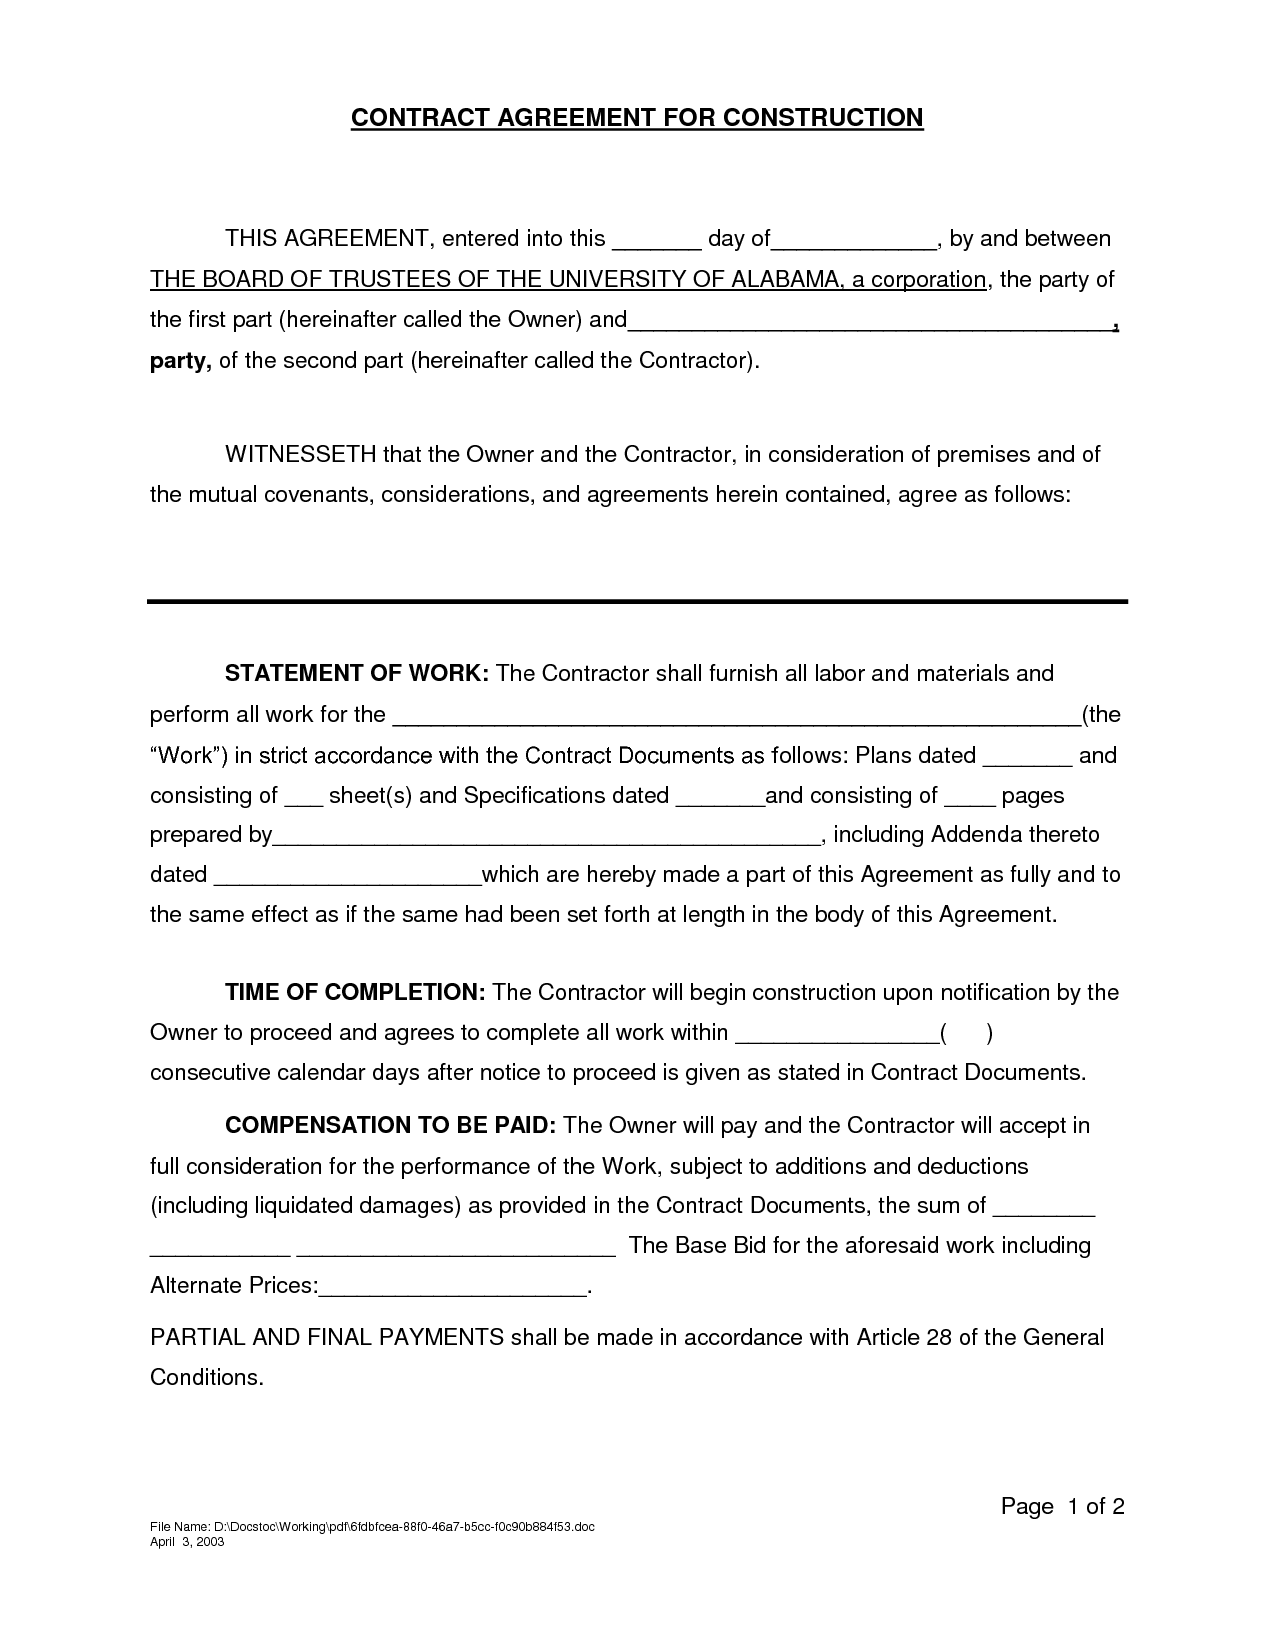 sample-contract-agreement-free-printable-documents